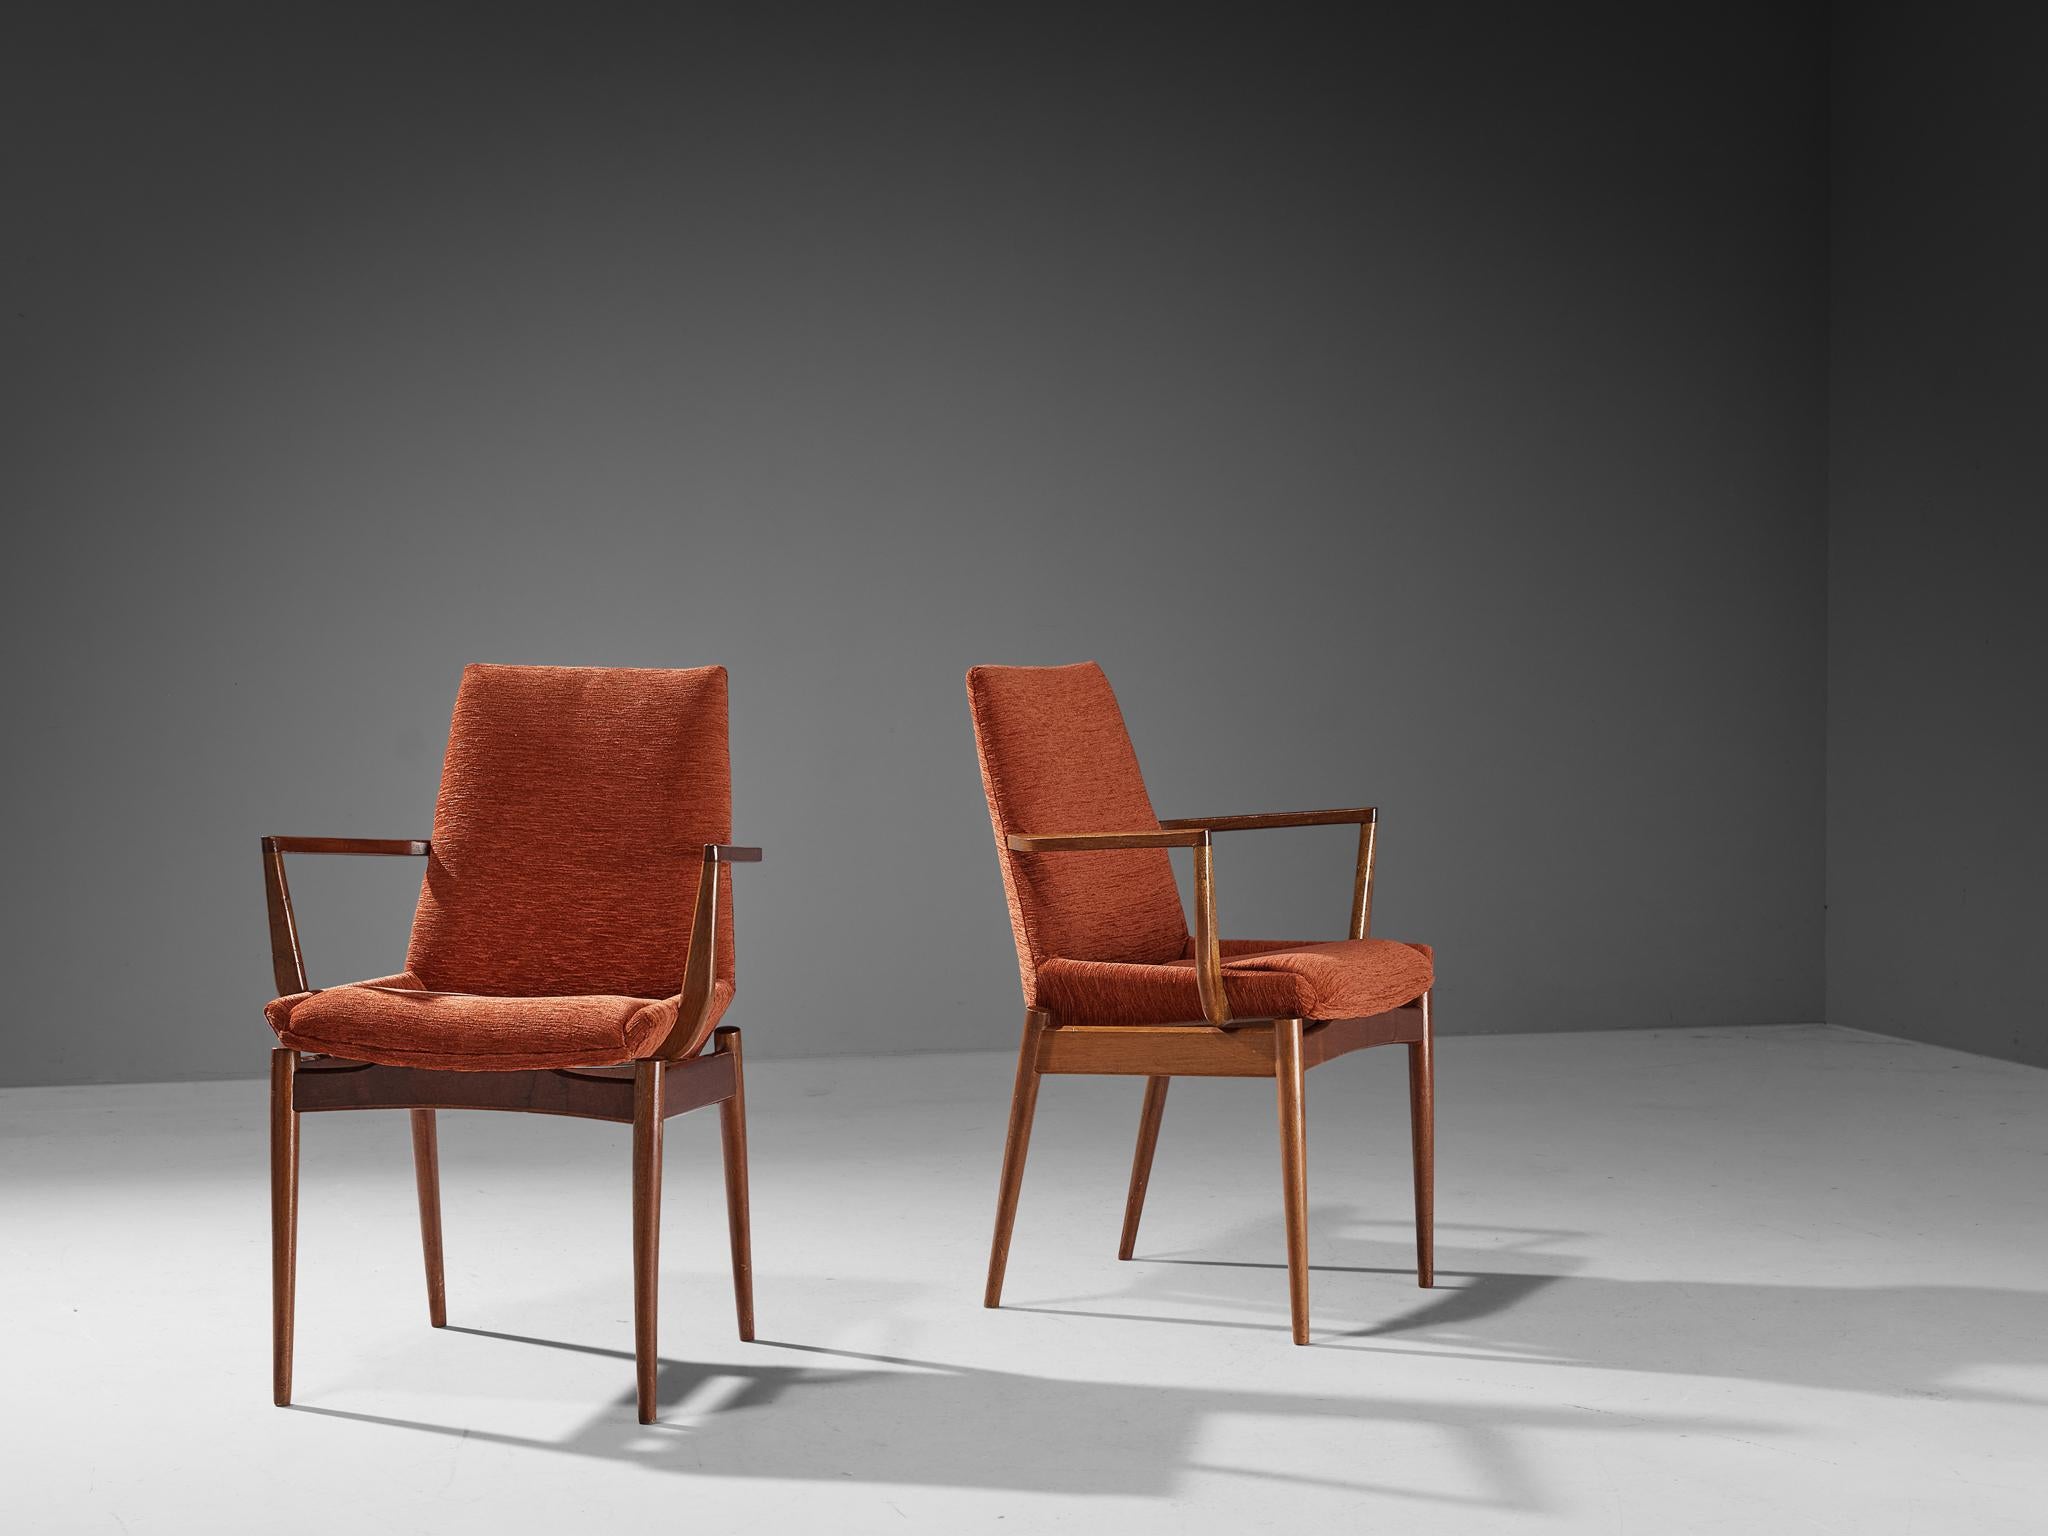 Robert Heritage for Archie Shine, armchairs, mahogany, red corduroy, United Kingdom, 1960s.

This design is sensuous, sculptural and elegant. The design features a high, sculpted back. The curved, tapered legs give the unit a sturdy and